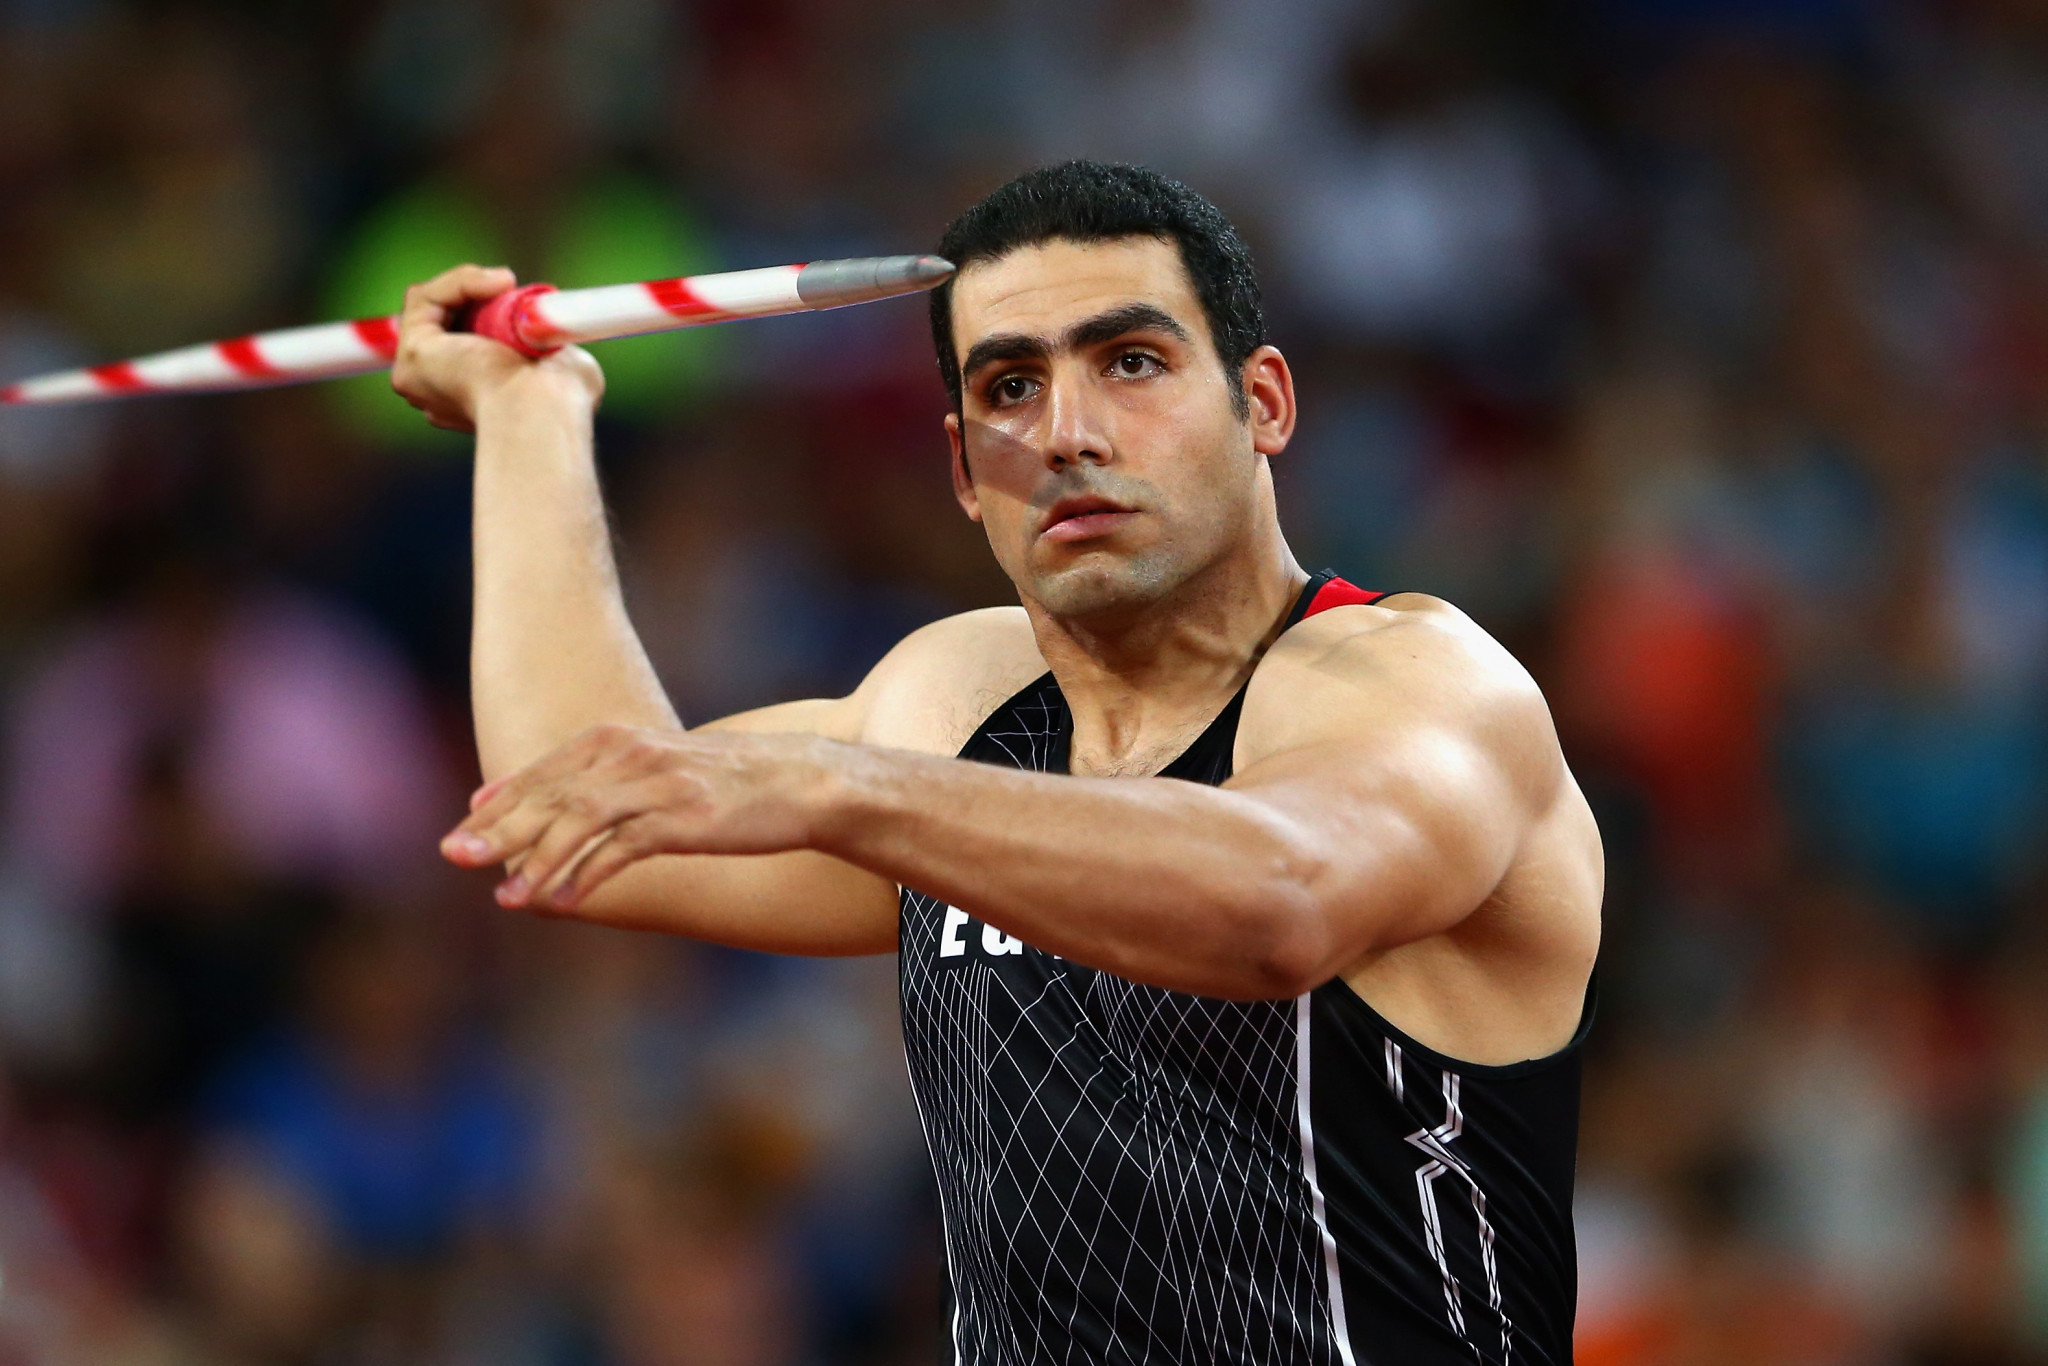 Egyptian javelin thrower Ihab Abdelrahman has had his four year sanction confirmed ©Getty Images